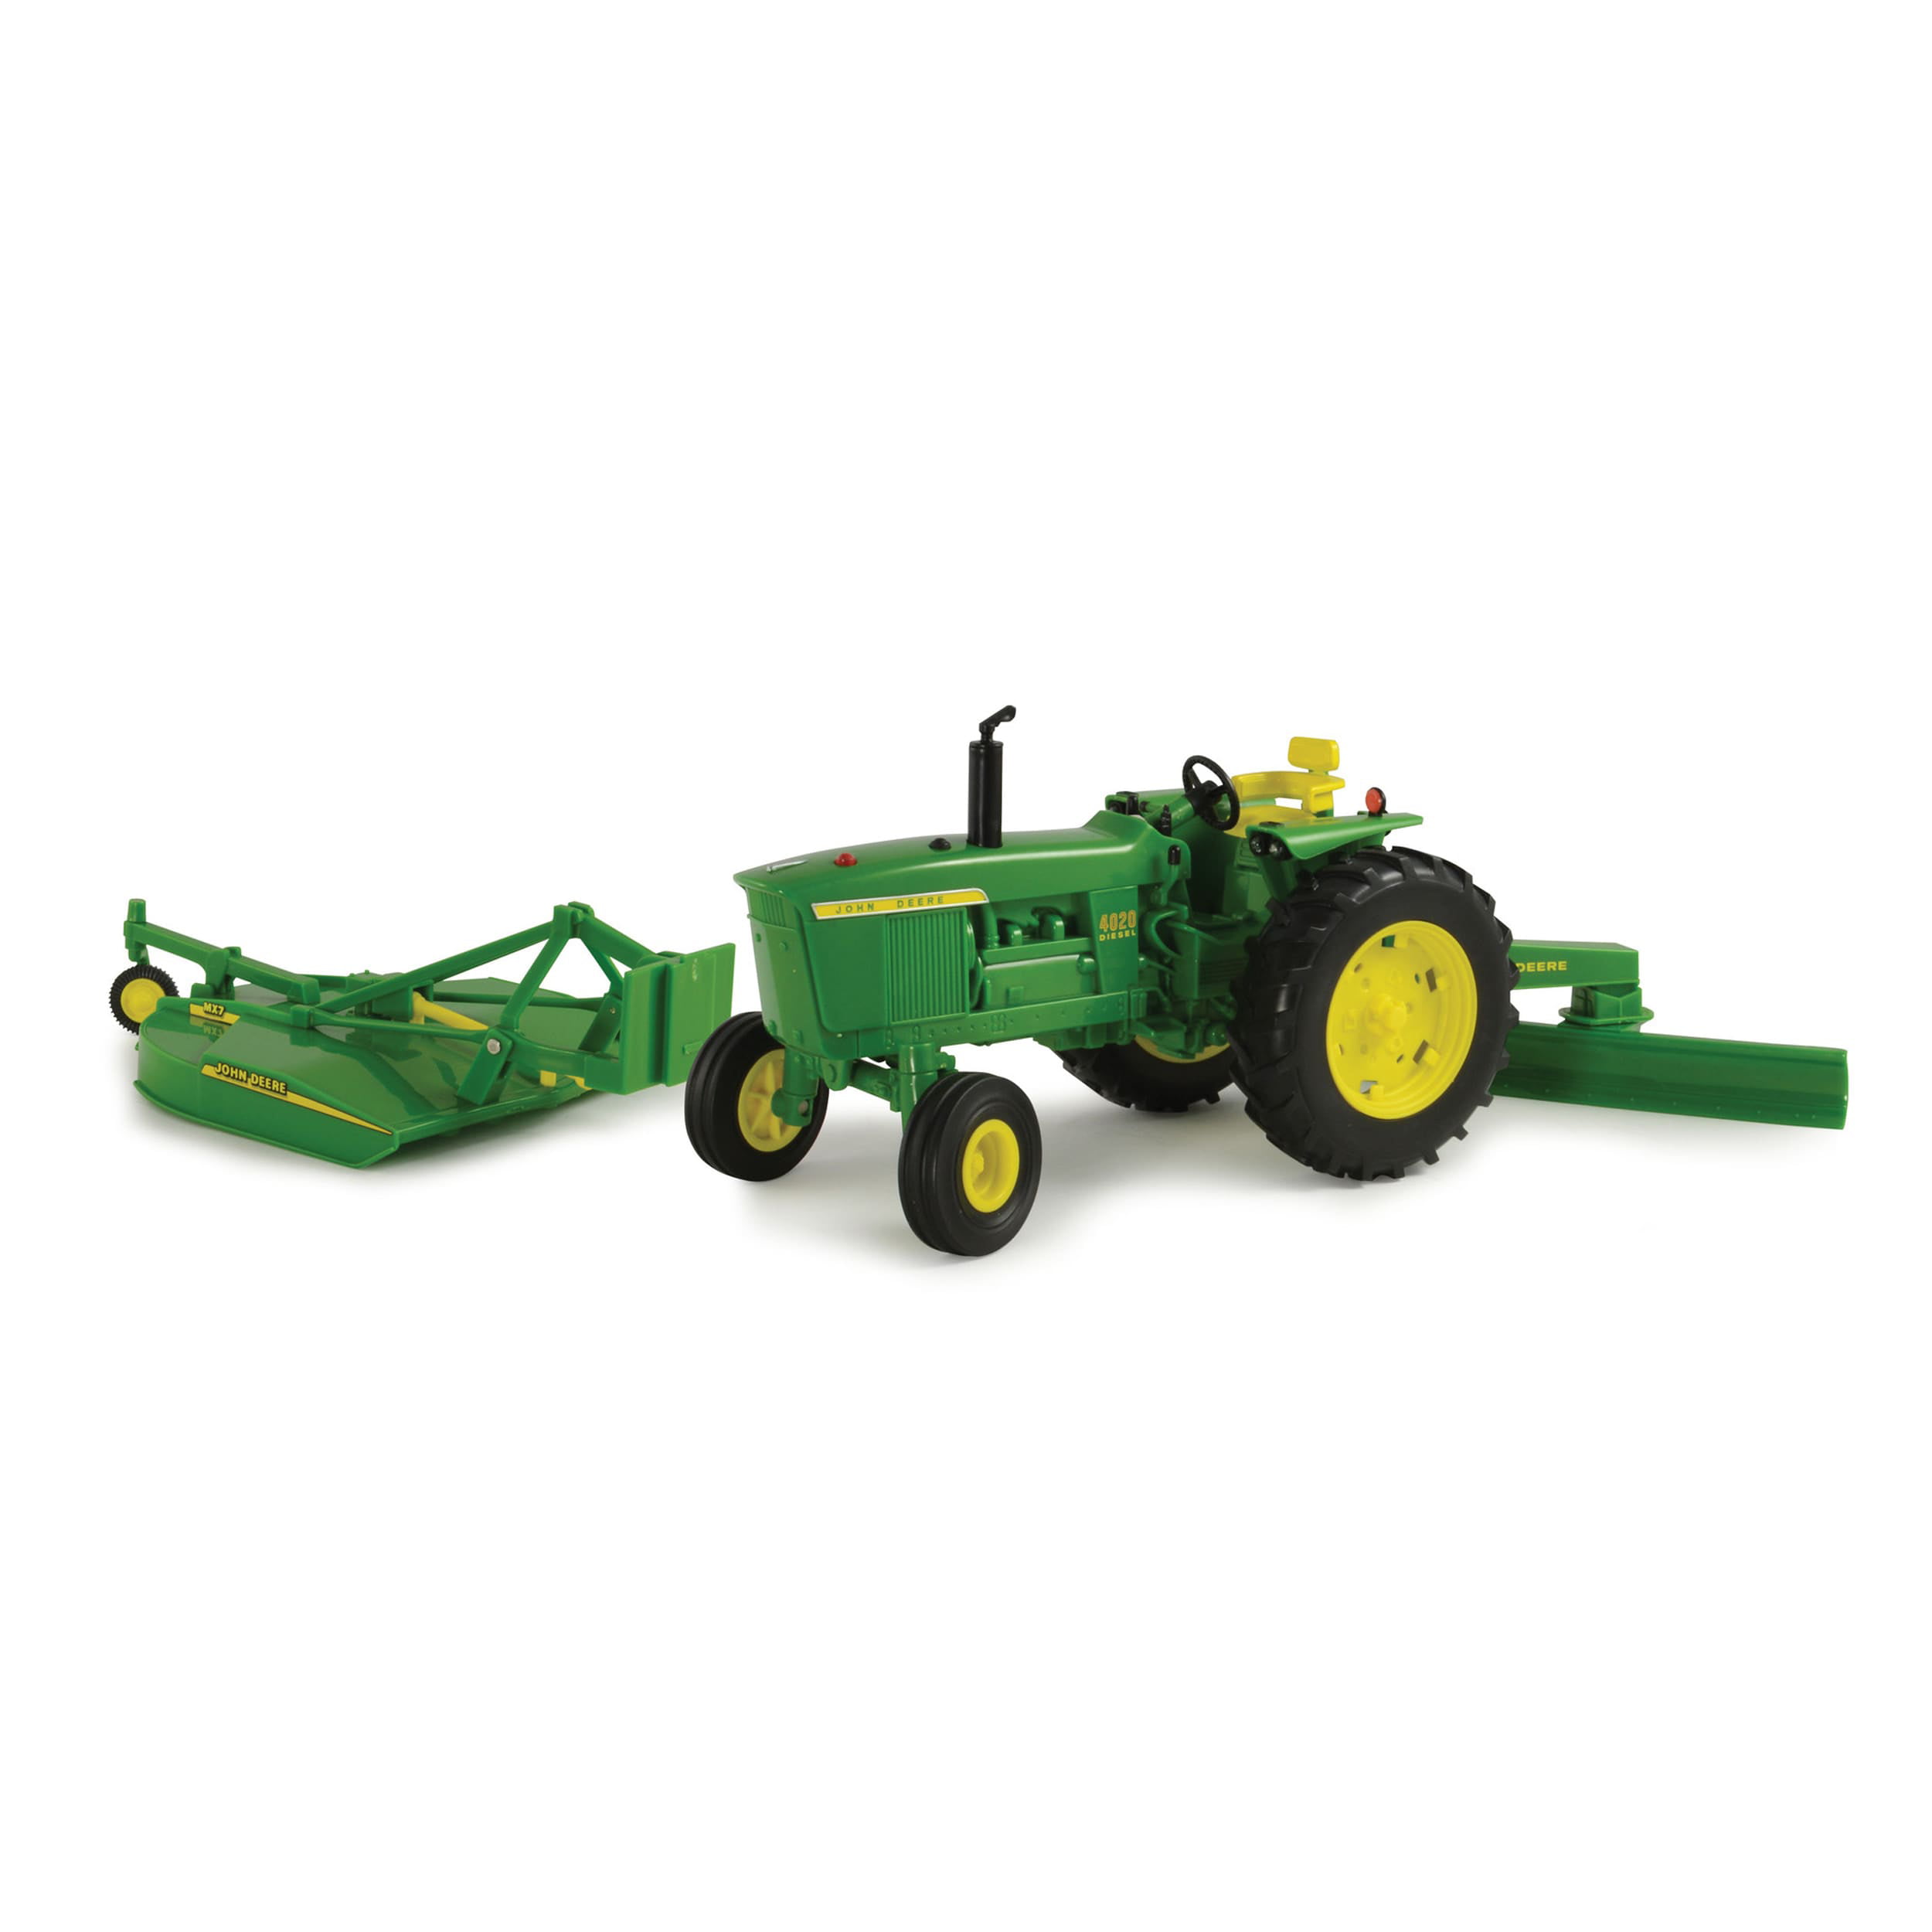 New John Deere Mini Metal 4020 Tractor Toy Craft Projects 2.25” 